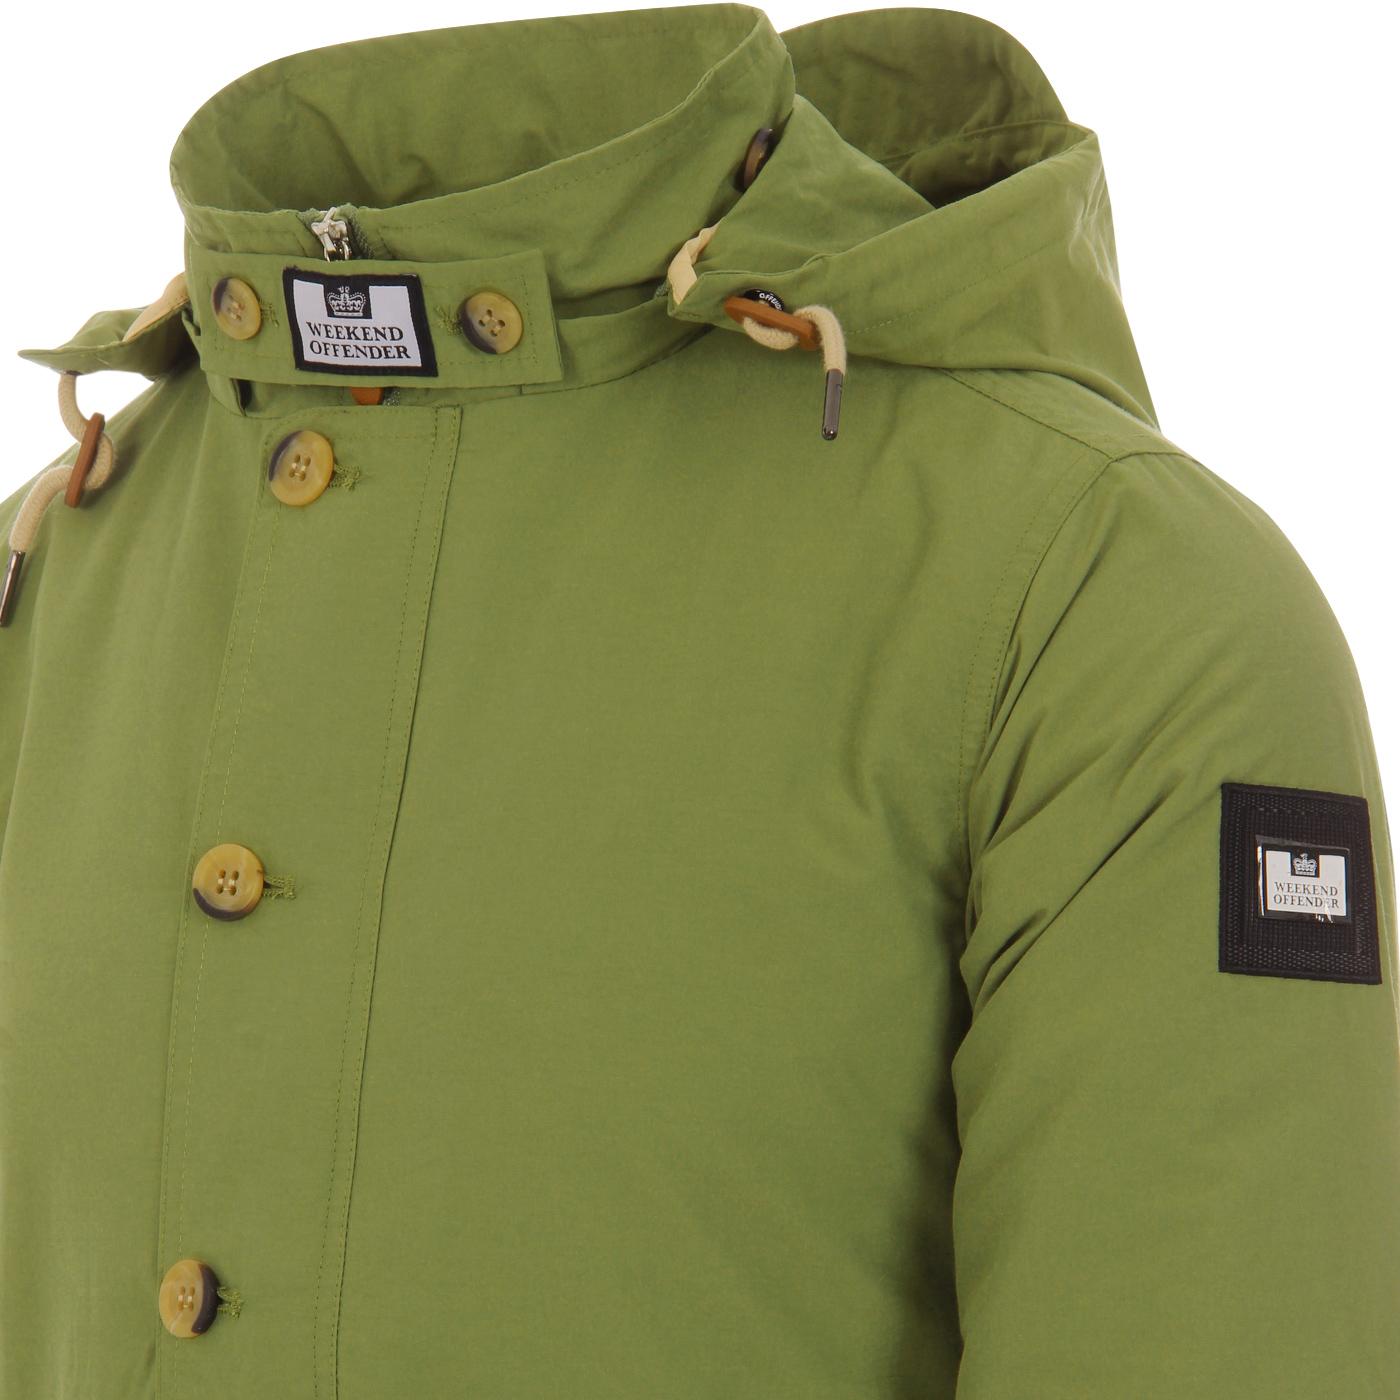 Naz WEEKEND OFFENDER Retro Casuals Hooded Jacket